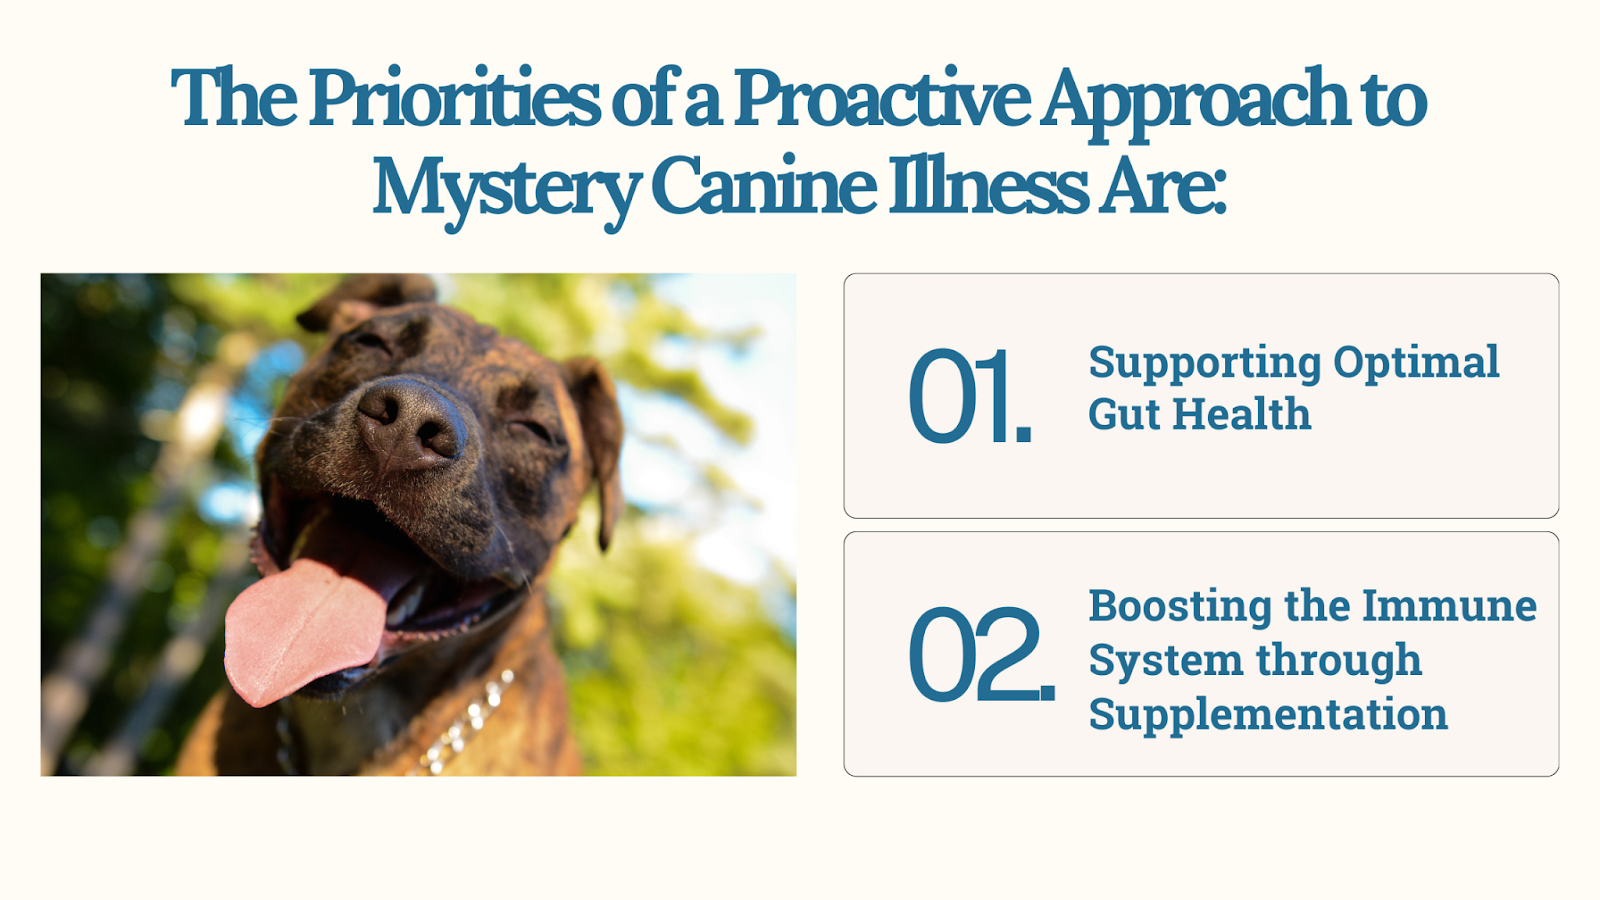 Proactive approach to mystery canine illness